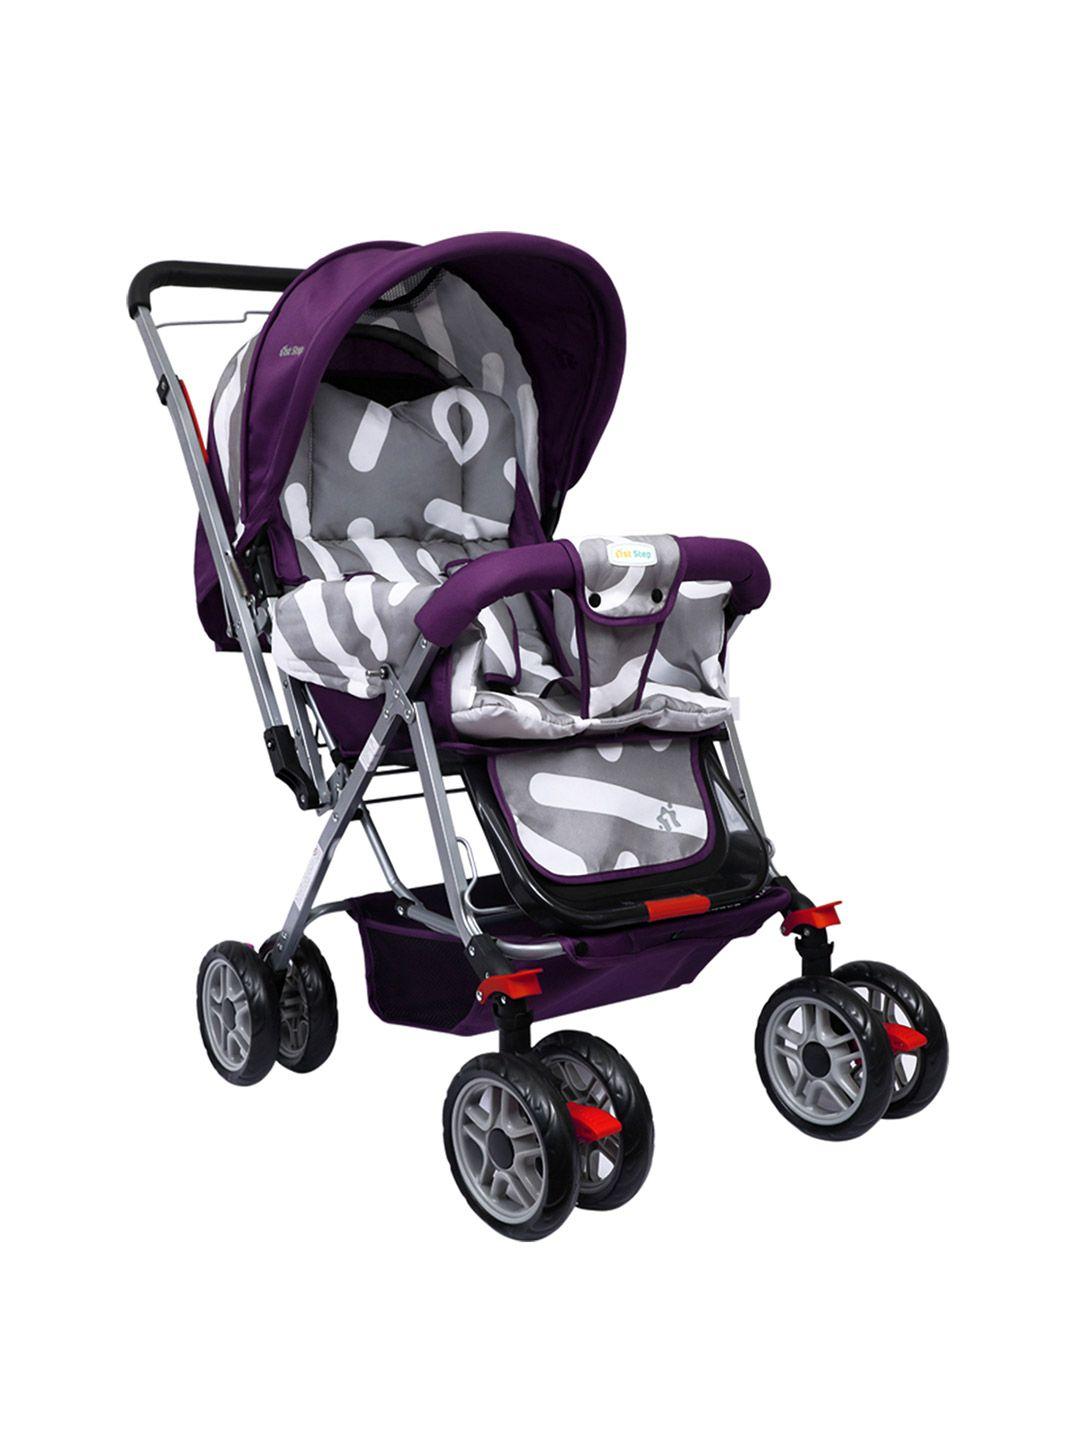 1st step kids purple baby stroller with 5 point safety harness & reversible handlebar